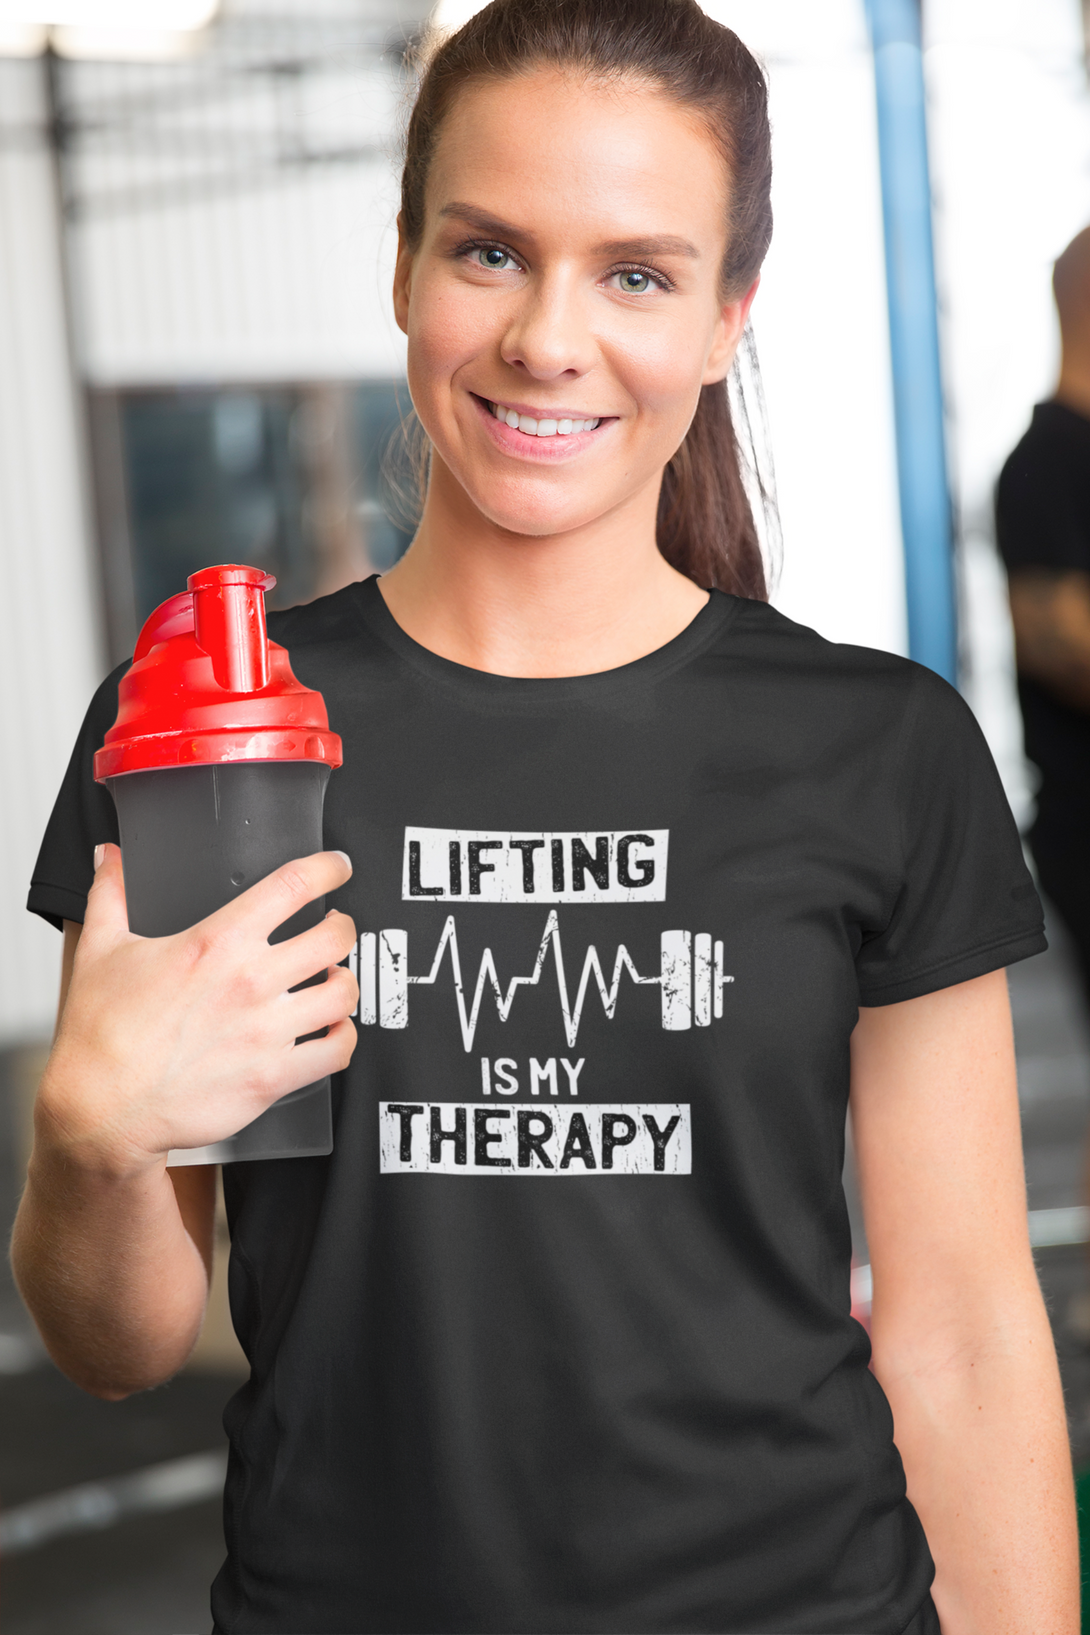 Lifting Is My Therapy Printed T-Shirt For Women - WowWaves - 6